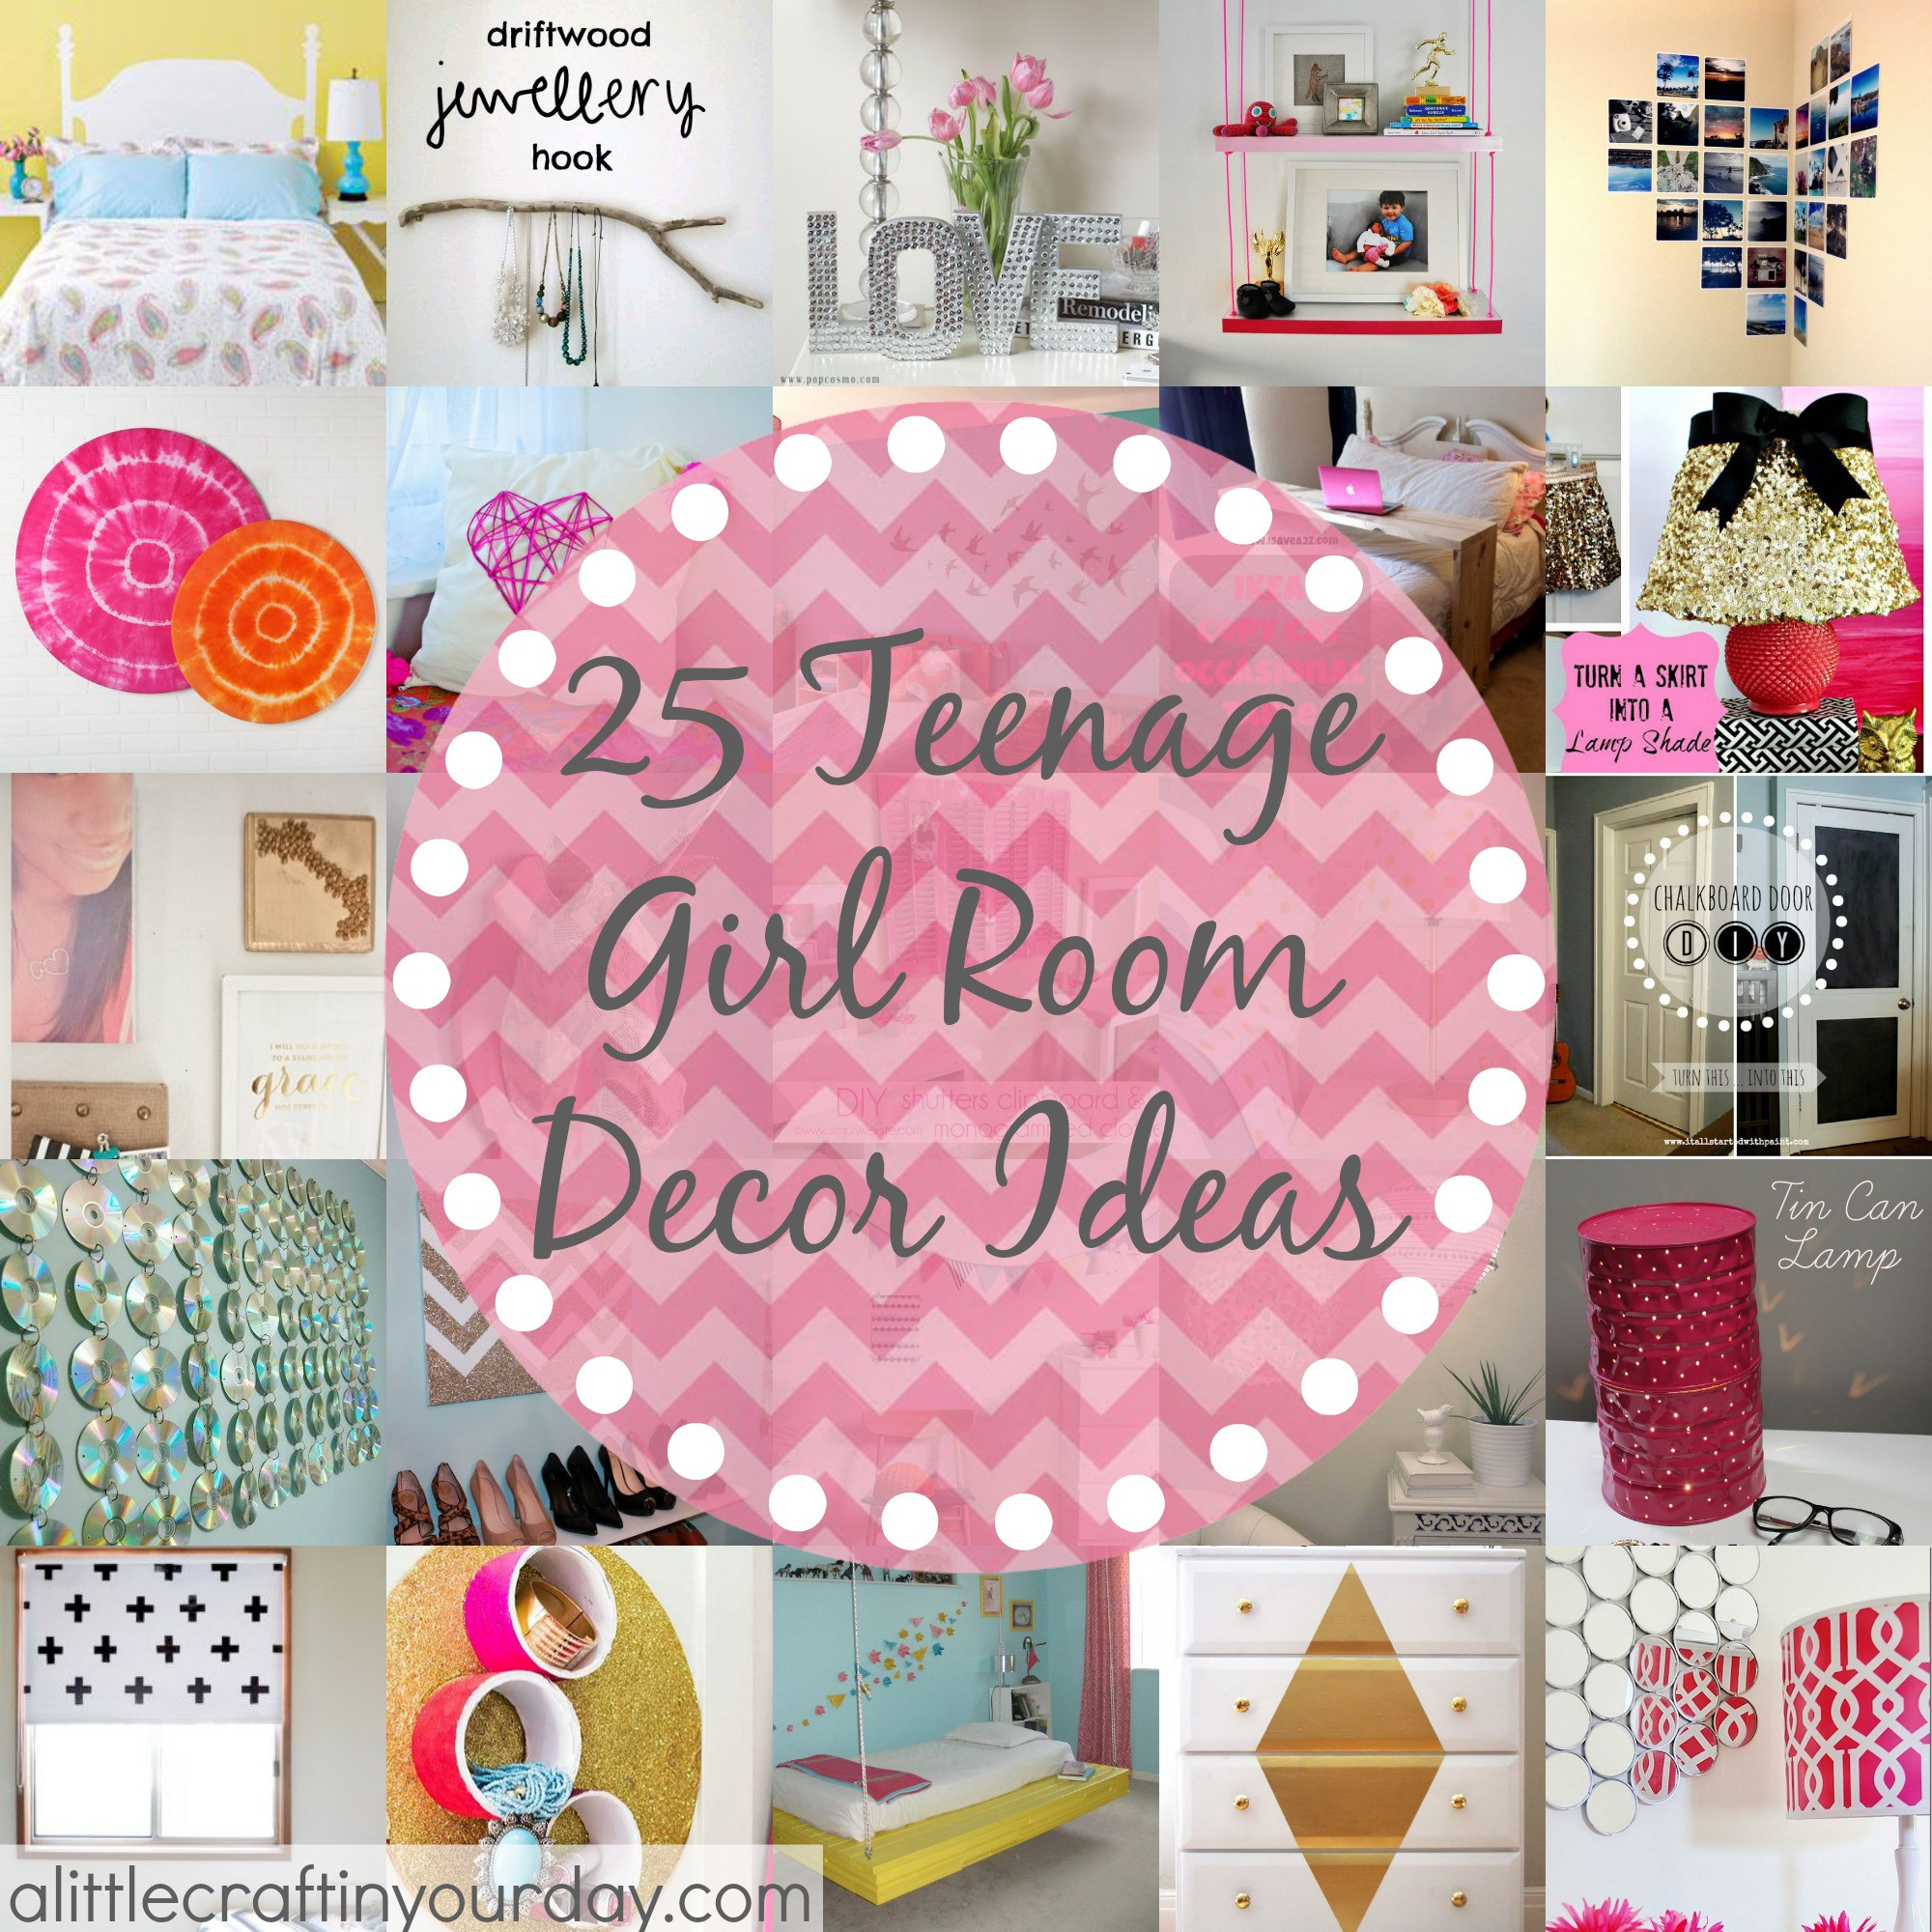 DIY Room Decor Ideas For Teens
 25 More Teenage Girl Room Decor Ideas A Little Craft In